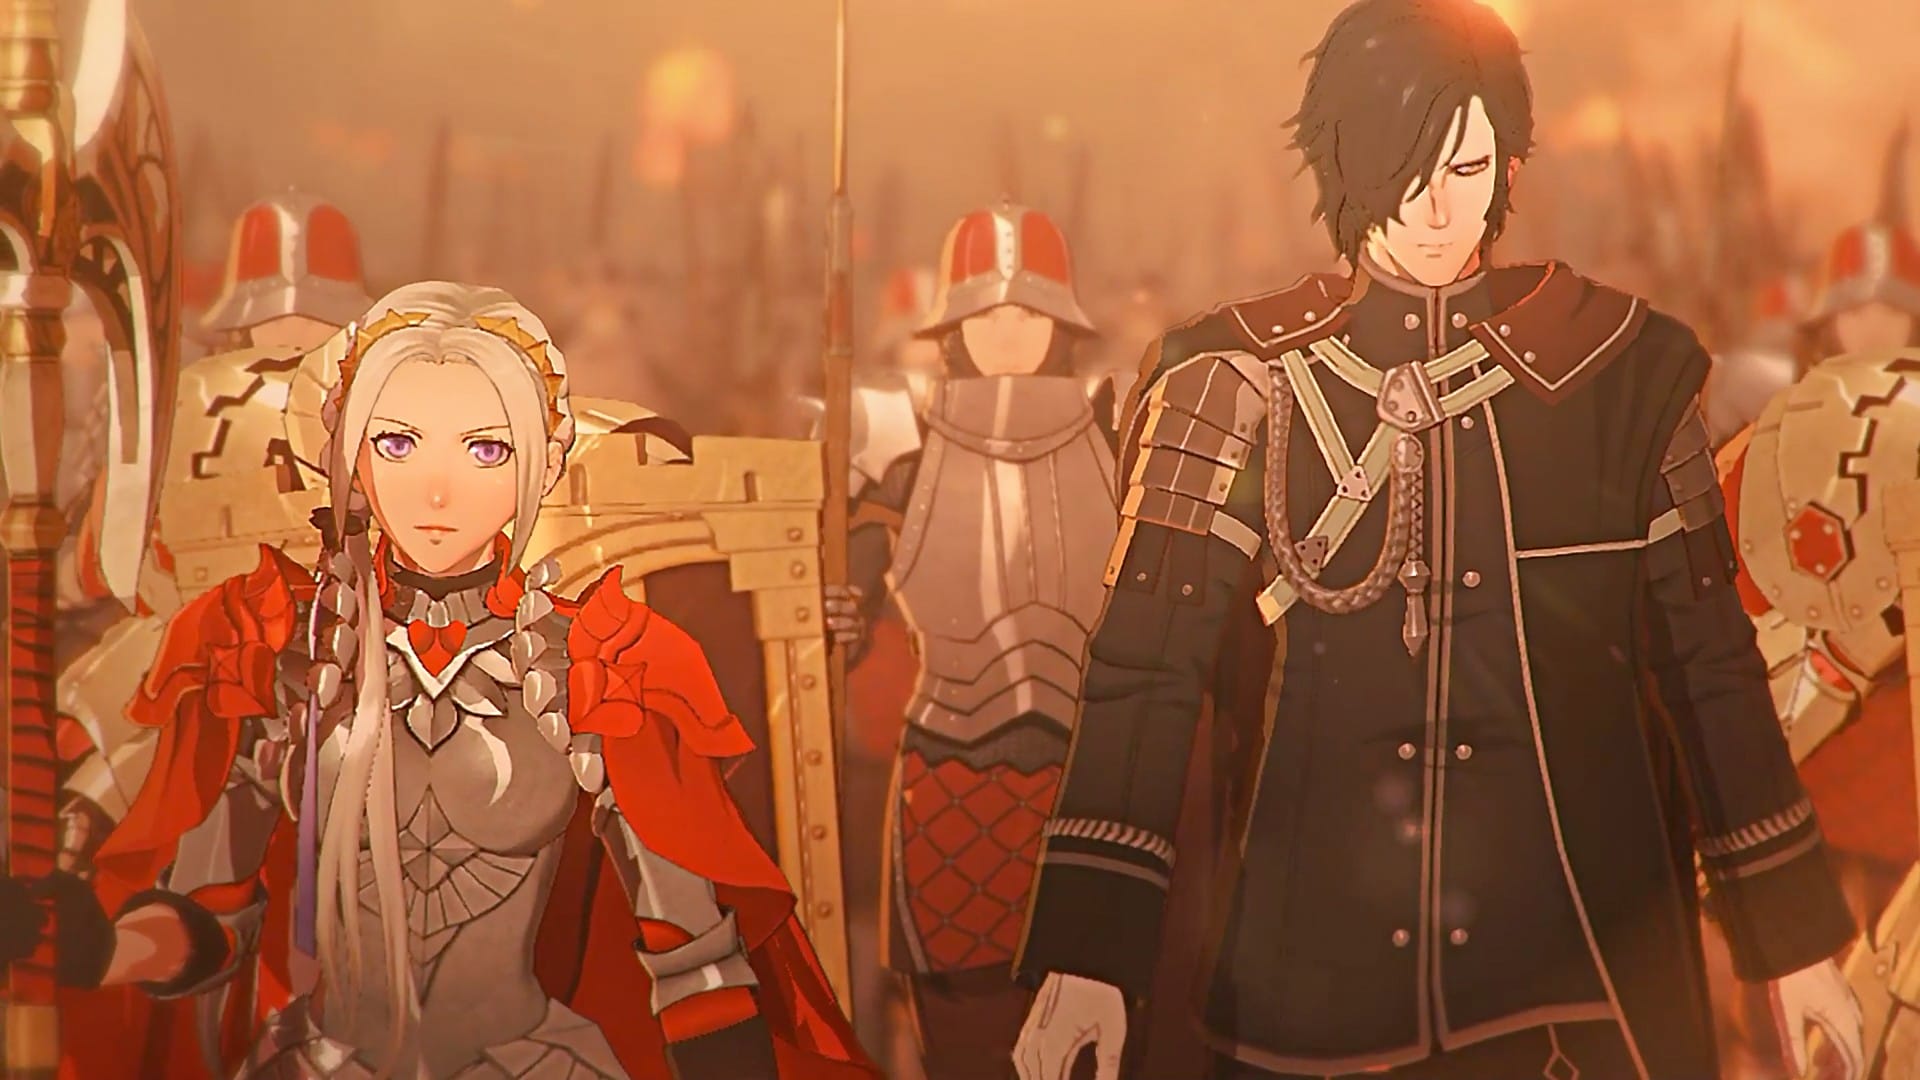 fire-emblem-warriors-three-hopes-can-bring-the-three-houses-fandom-together-gayming-magazine